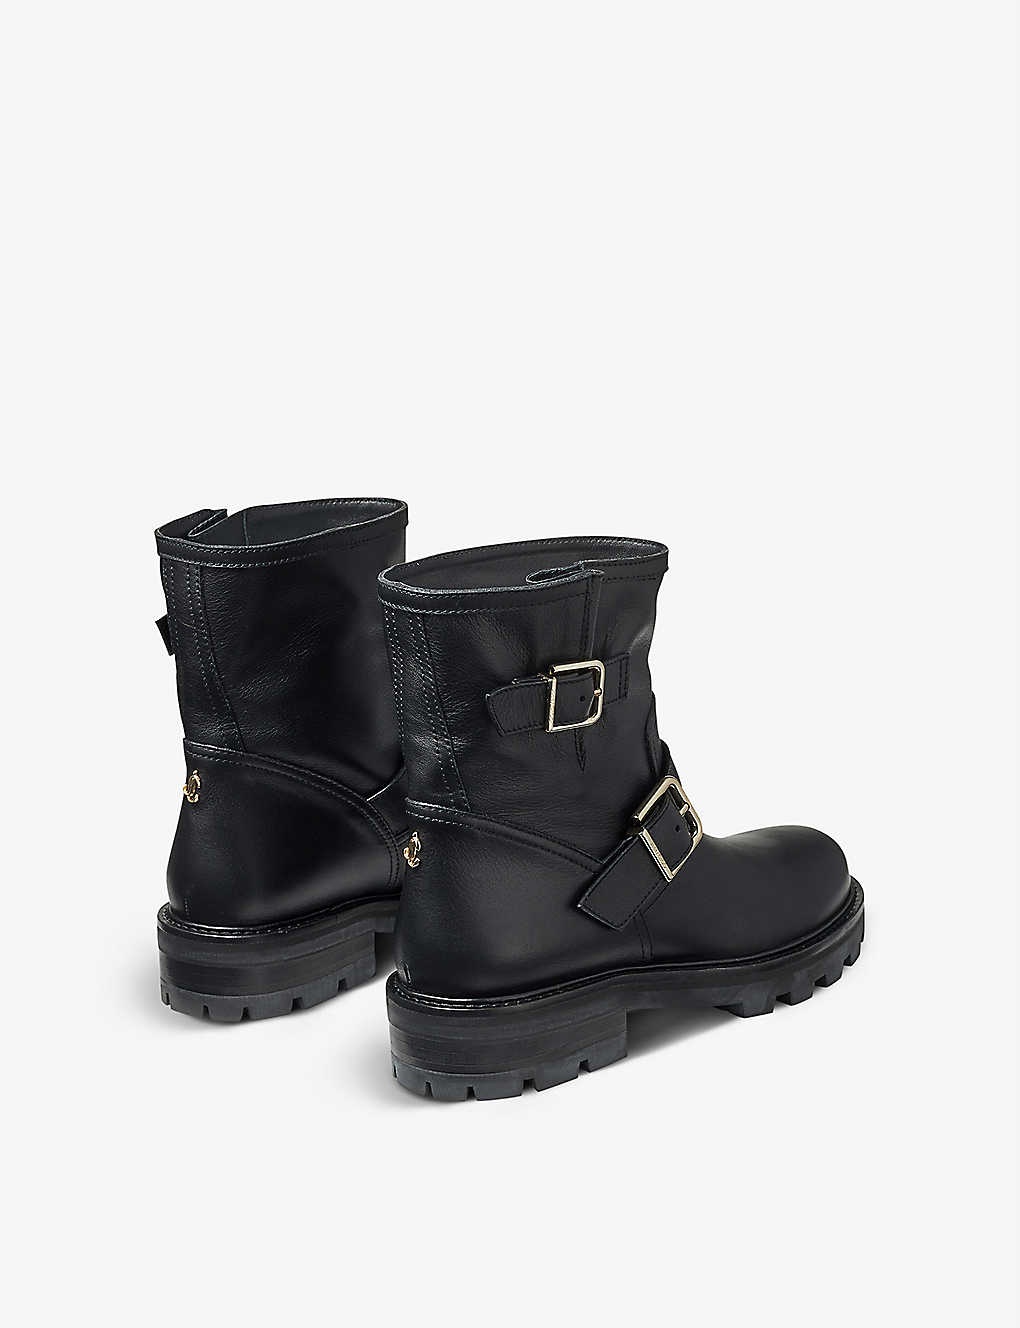 Youth II leather ankle boots - 3